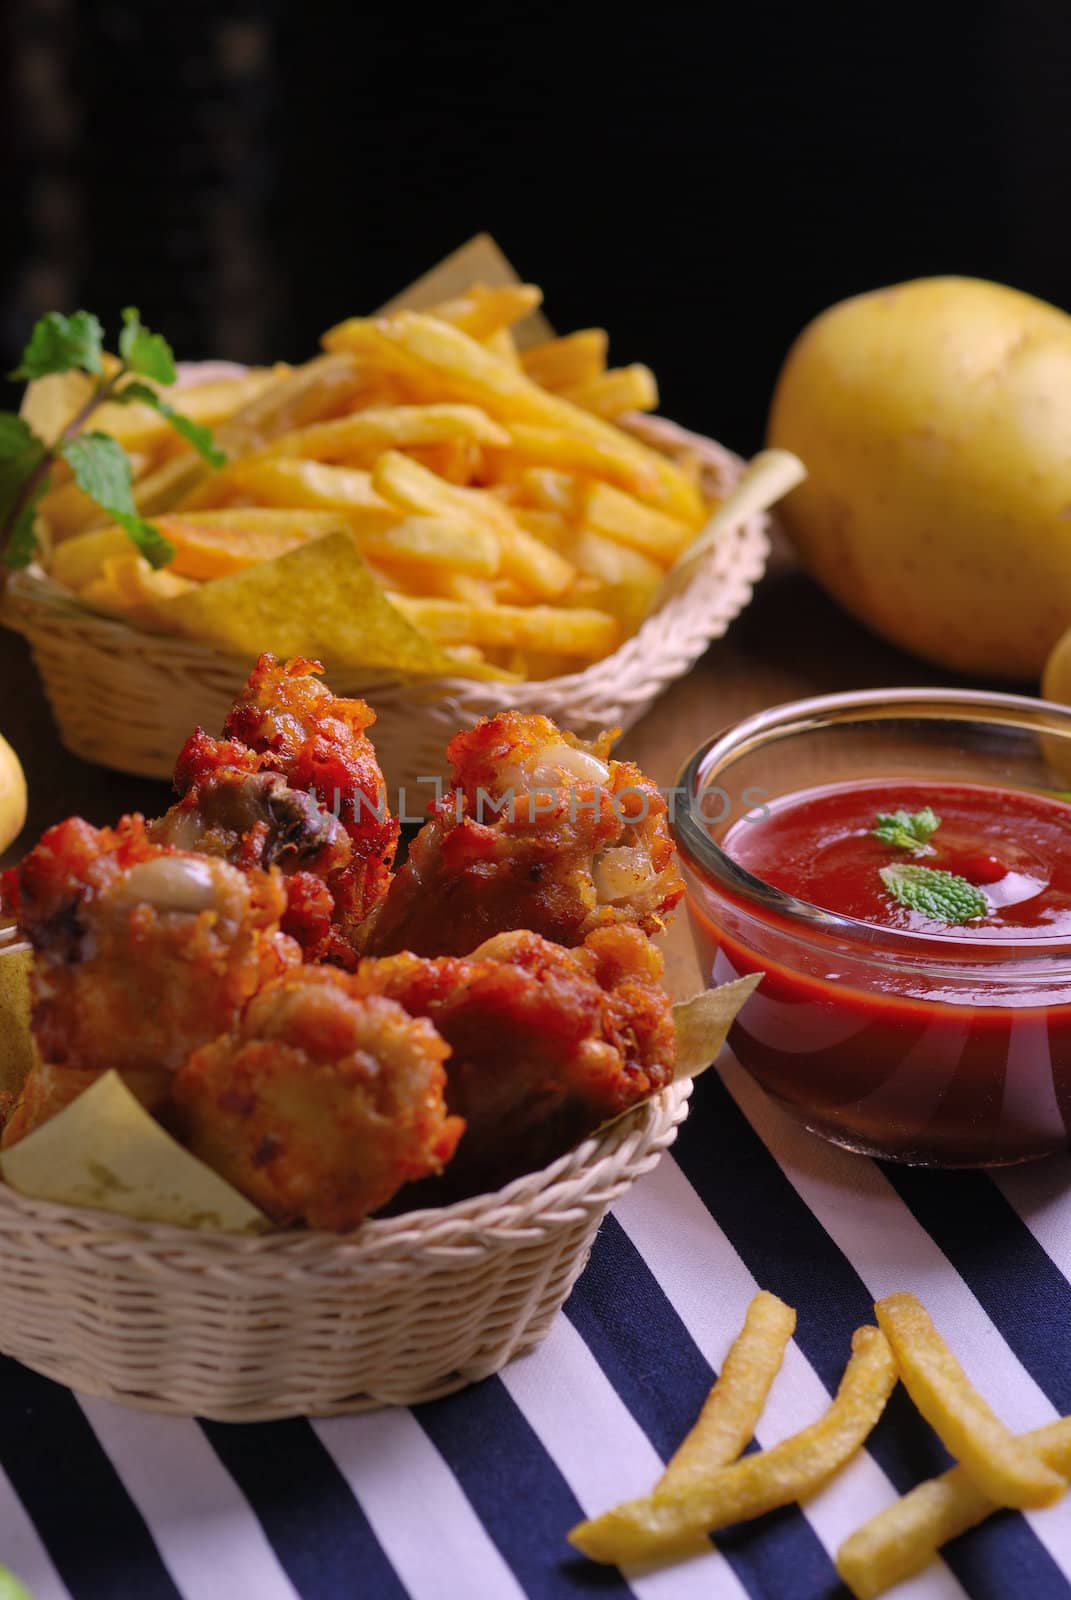 fried chicken wings with french fries and ketchup by teen00000